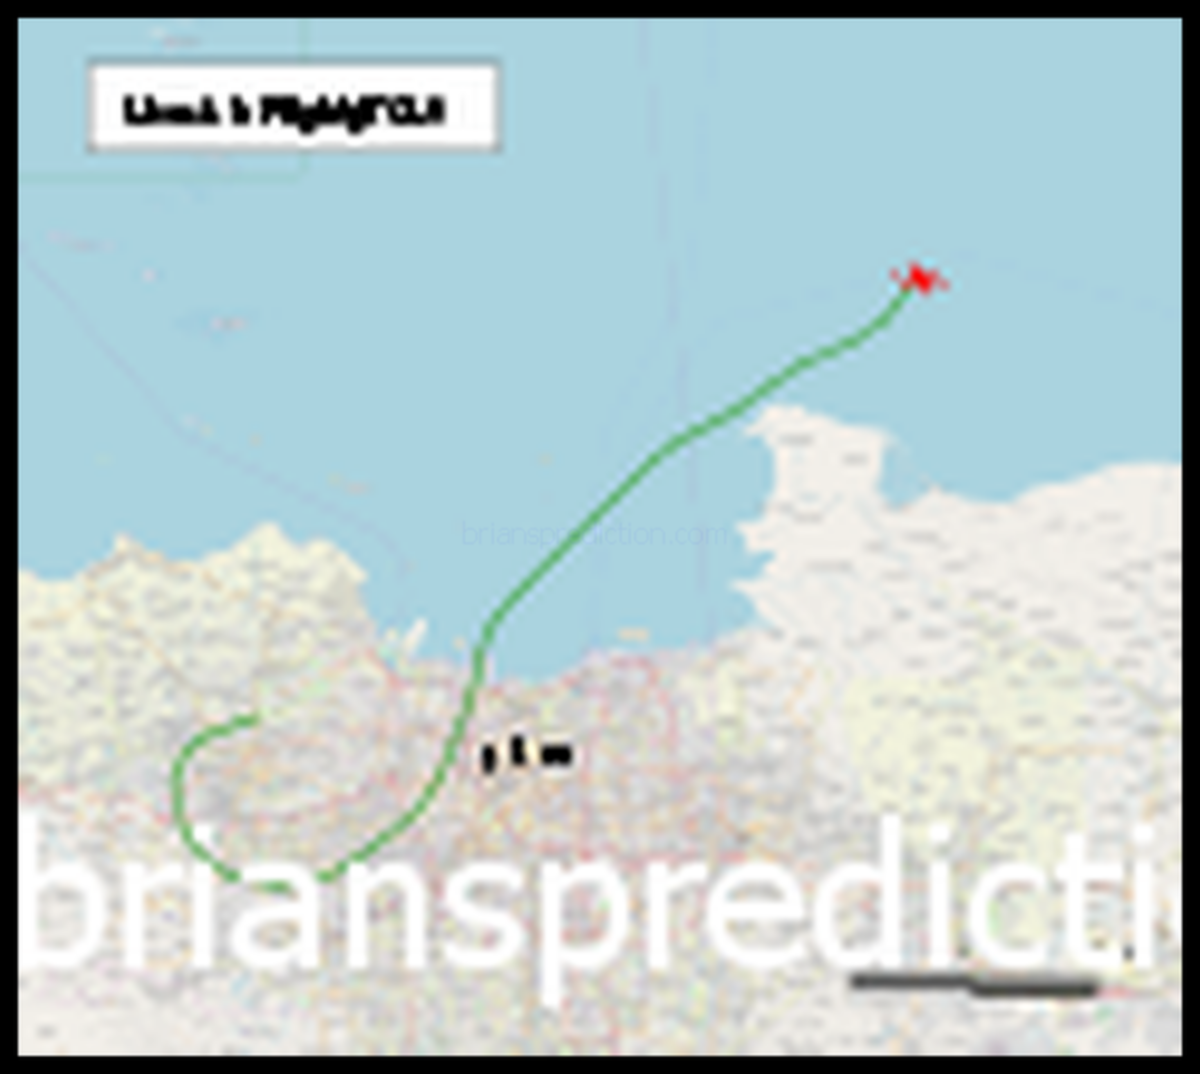 120px-Route of Lion Air Flight 610 svg Lion Air Flight 610 crash on October 29th 2018 is an act of terrorism not an accident by psychic Brian Ladd~0
120px-Route of Lion Air Flight 610 svg Lion Air Flight 610 crash on October 29th 2018 is an act of terrorism not an accident by psychic Brian Ladd~0
